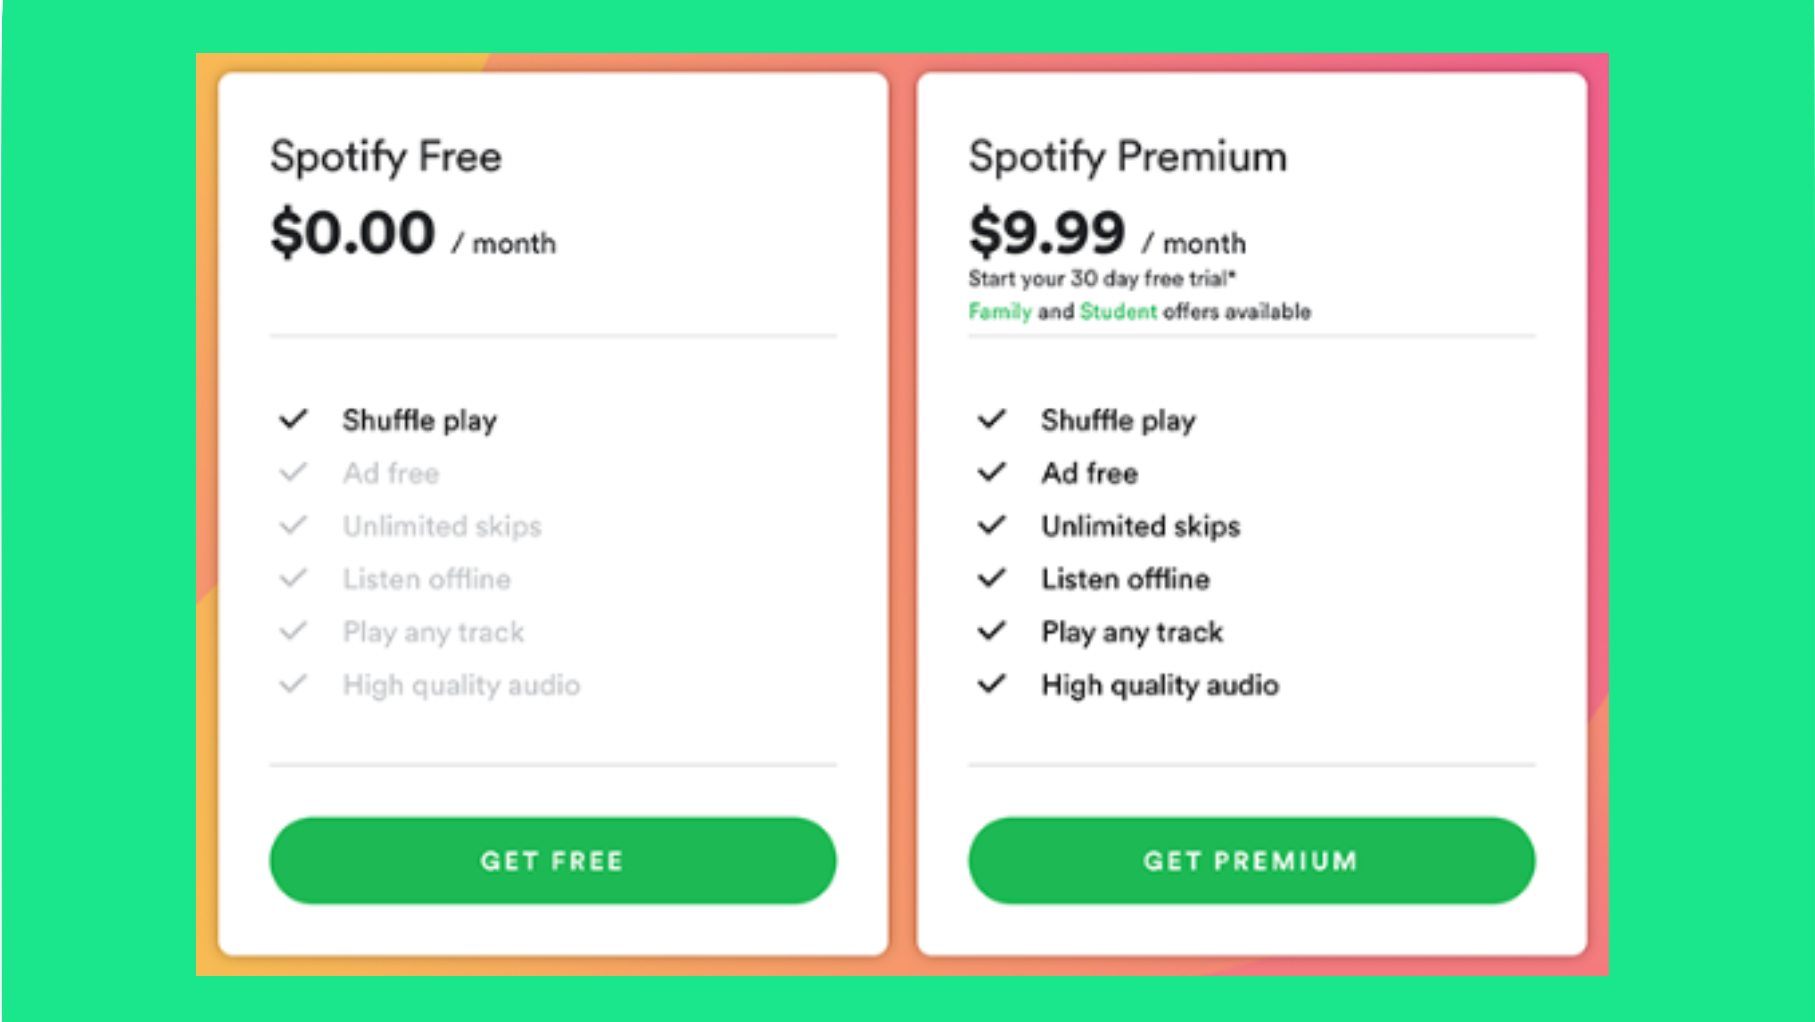 How To Get Free Spotify Premium Account 2022